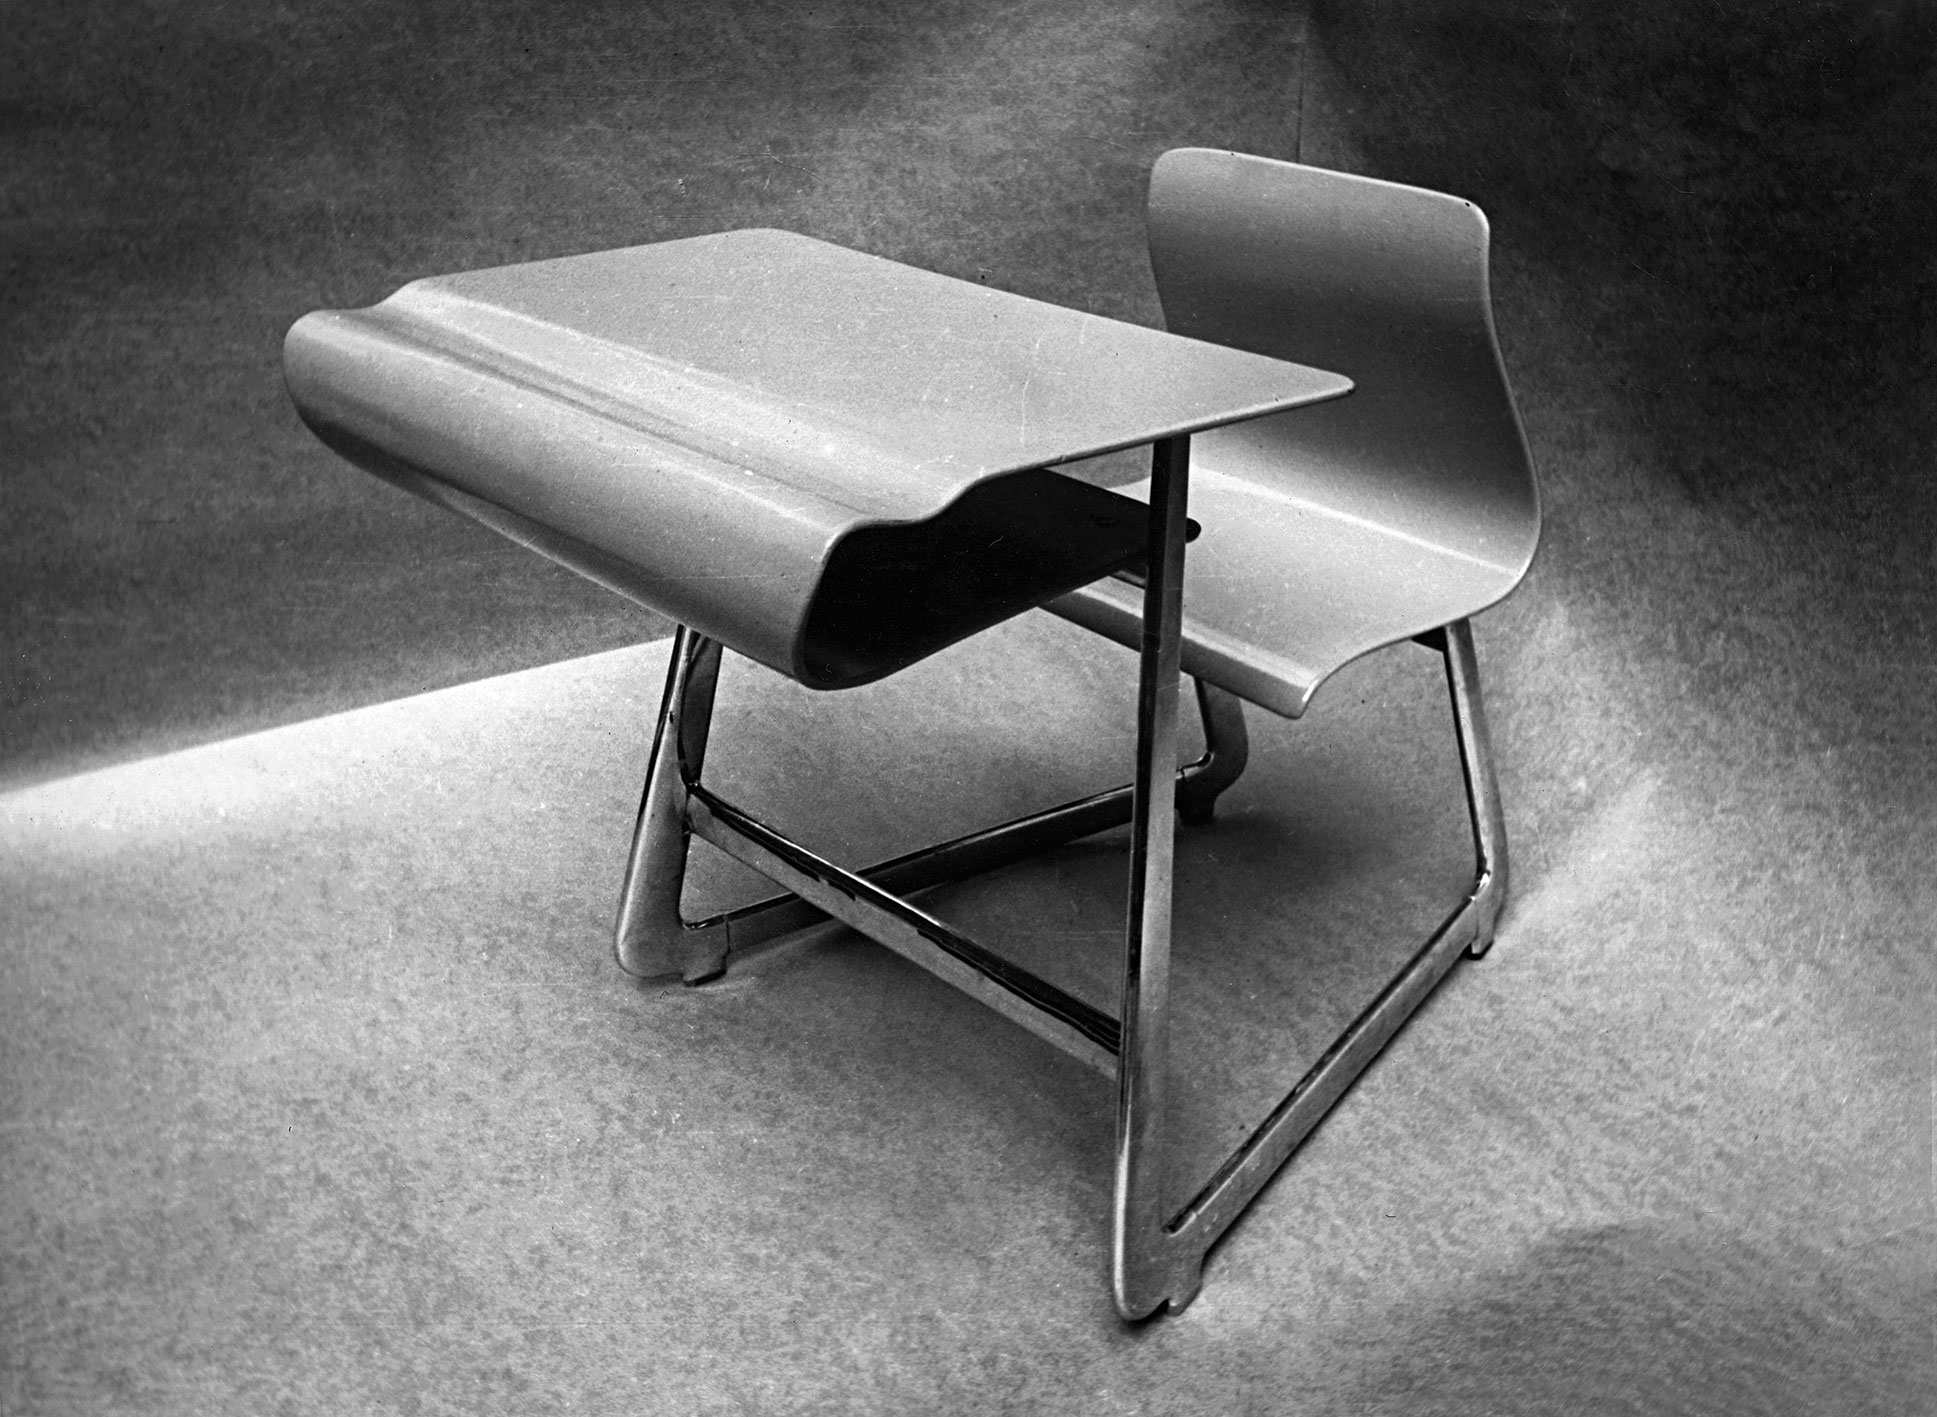 Prototype of the single-seater school desk, studied in collaboration with the architects E. Beaudouin and M. Lods, ca. 1935.